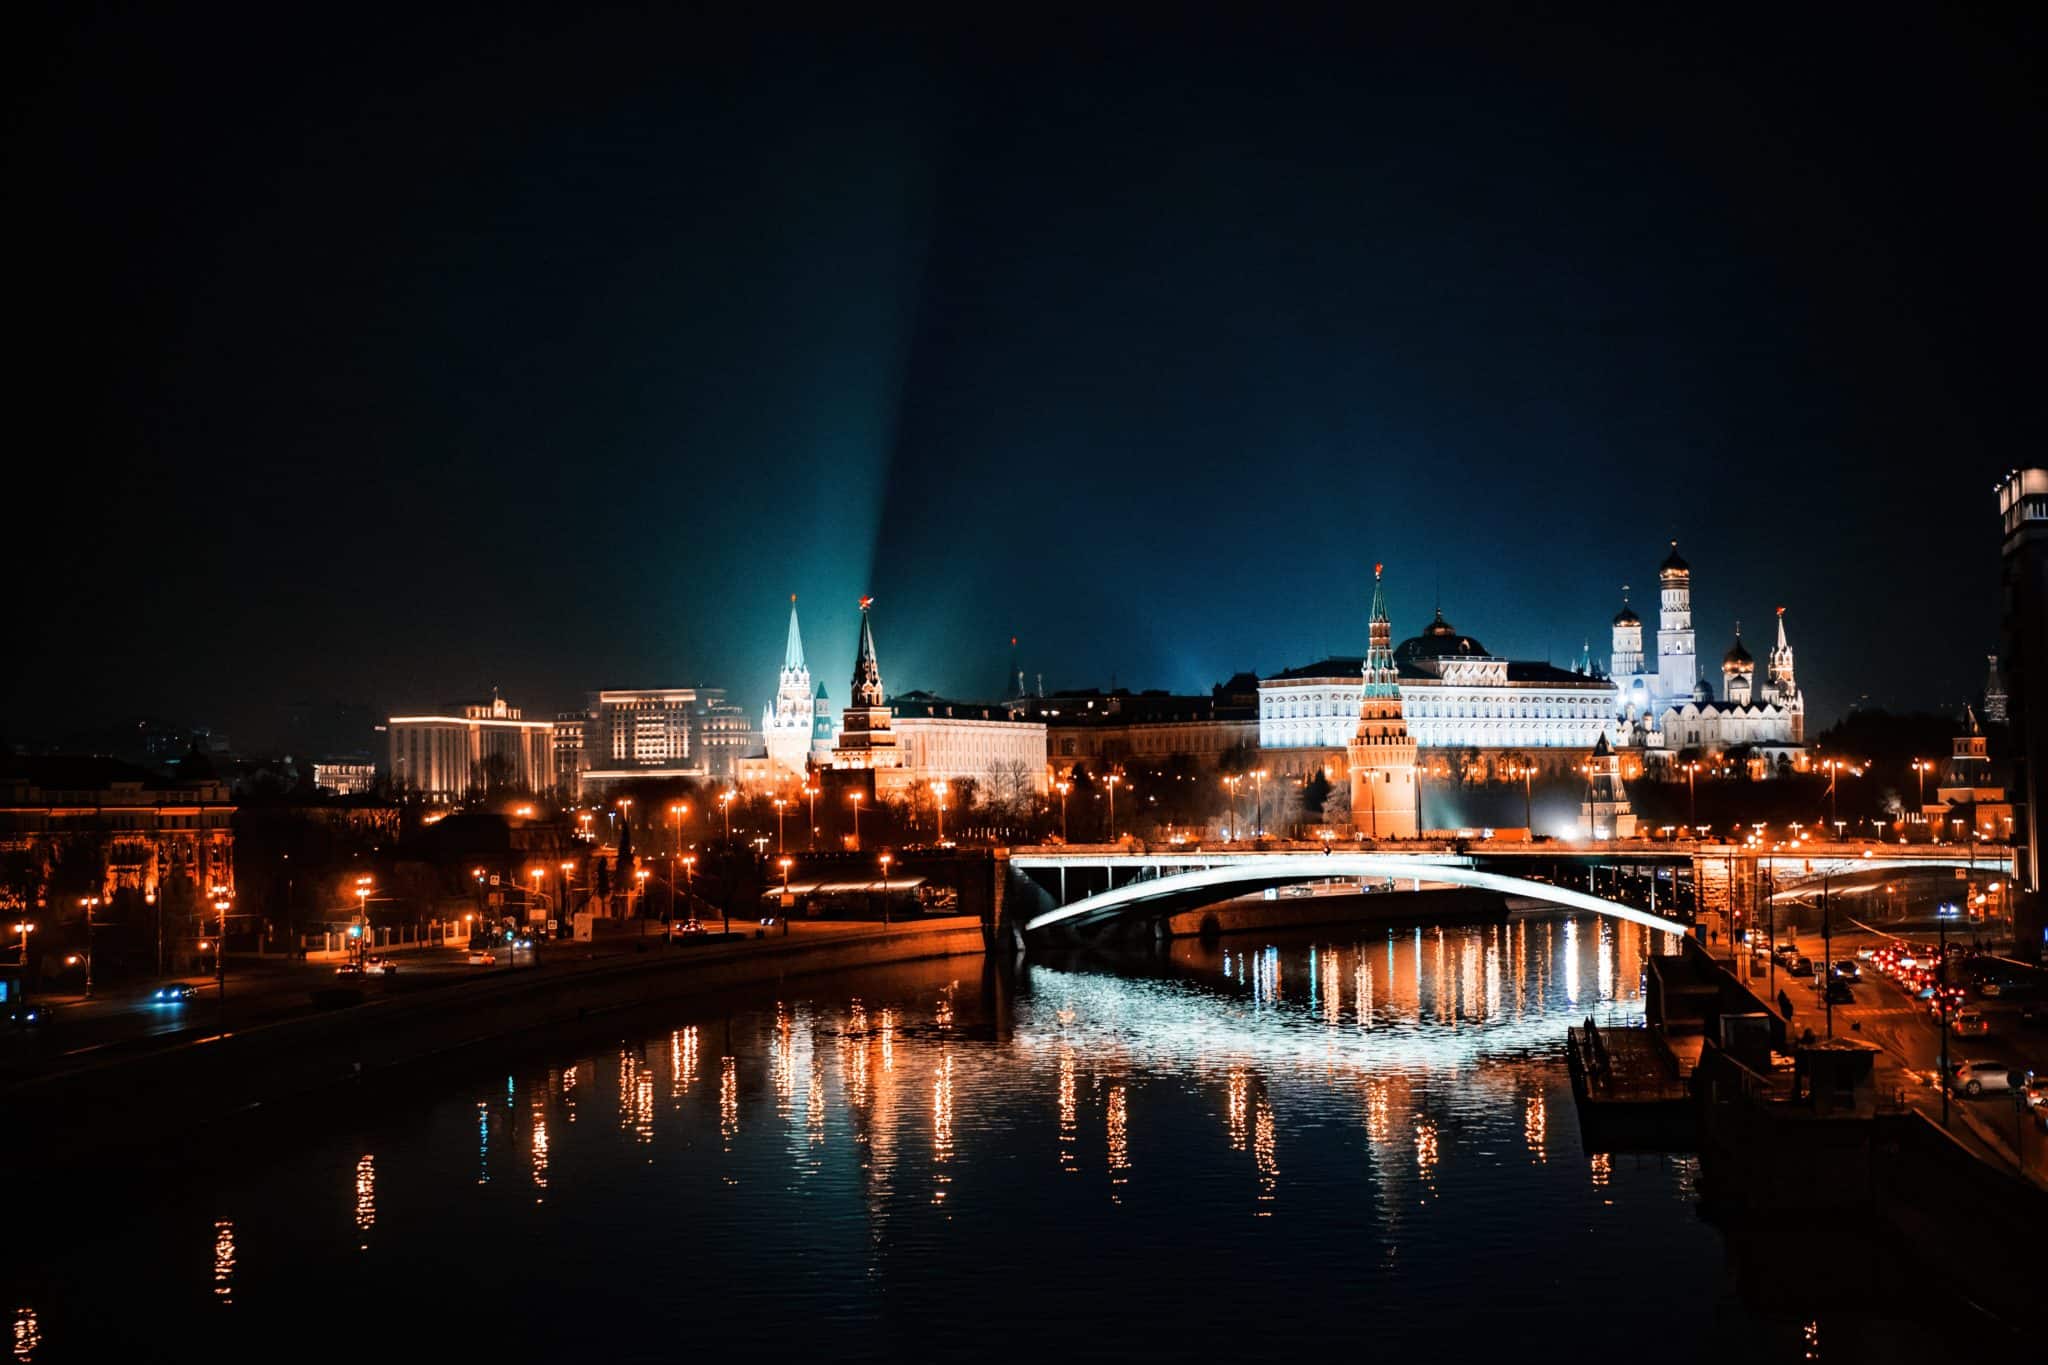 Moskva, Russia photographed by A.L. courtesy of unsplash | The Pink Bride® www.thepinkbride.com